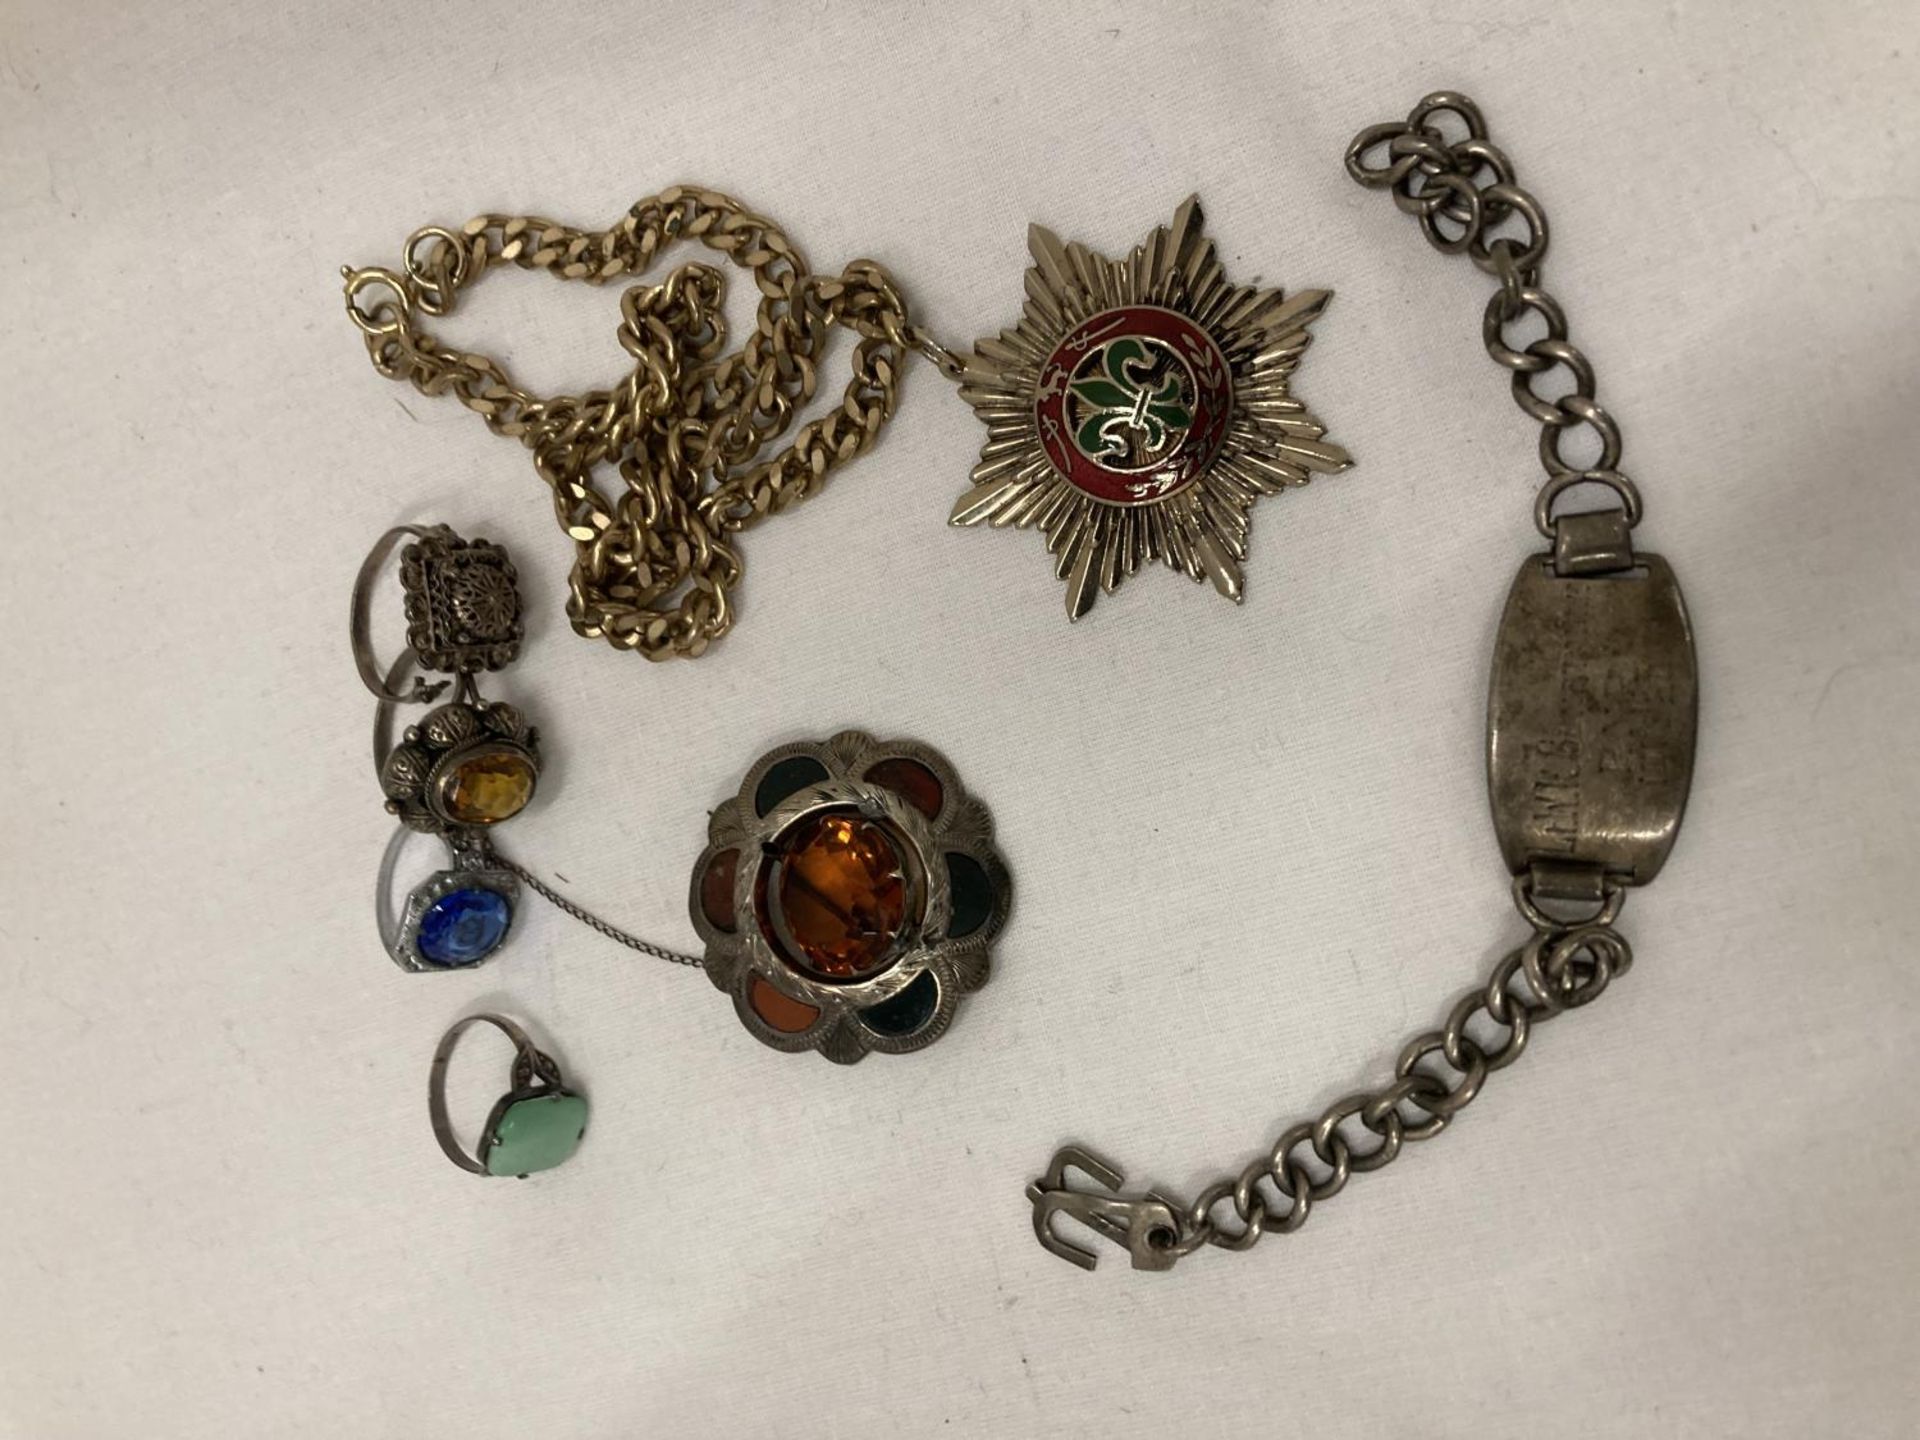 A QUANTITY OF VINTAGE COSTUME JEWELLERY TO INCLUDE A BROOCH, RINGS, CUFFLINKS, NECKLACE, ETC - Image 5 of 5